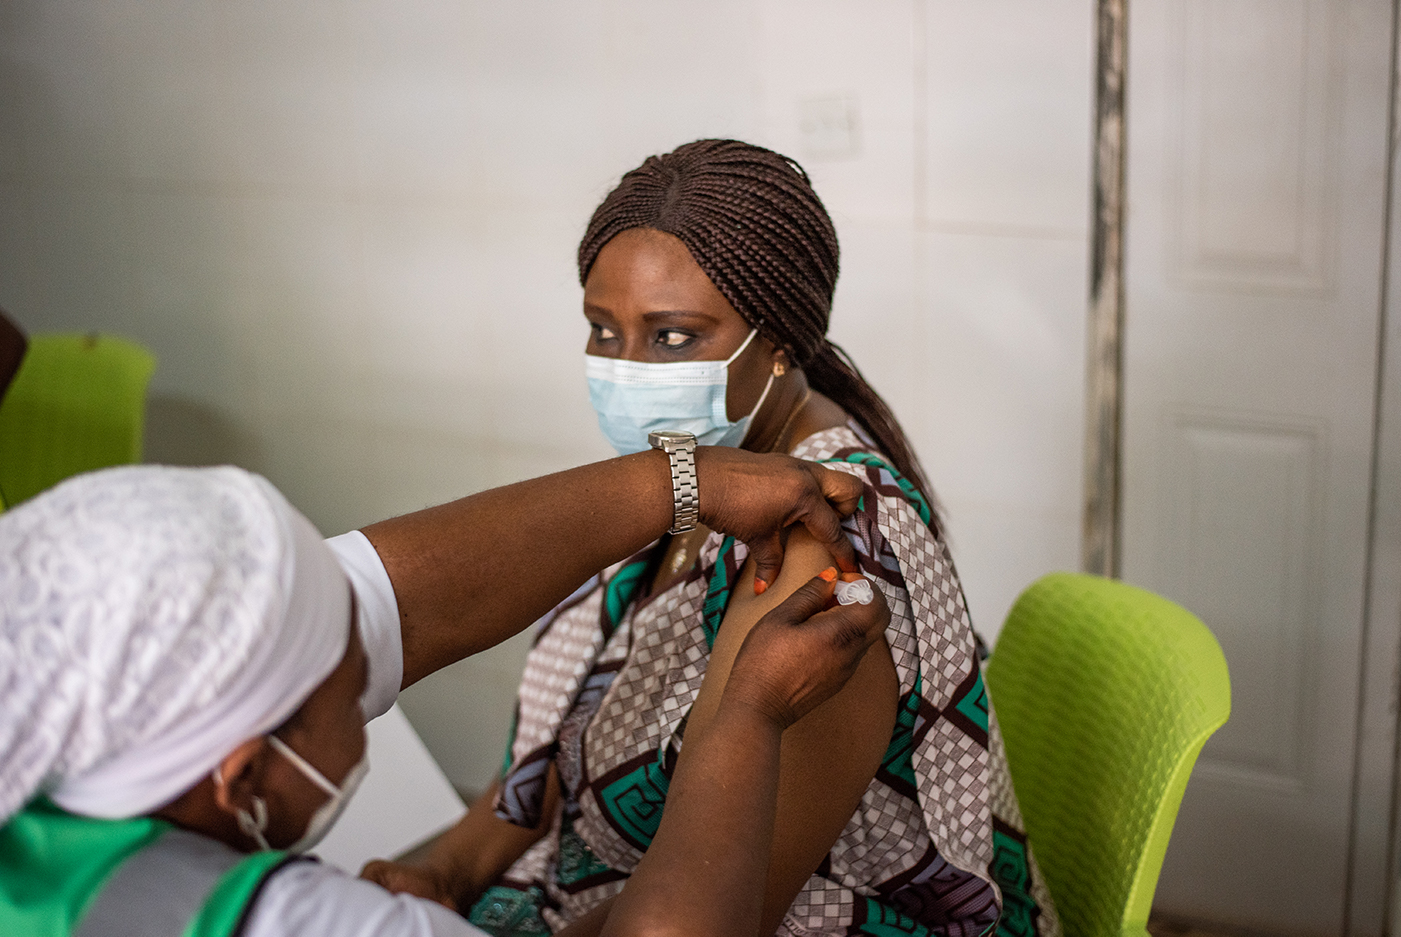 Health worker, Morgan R. E., receives the COVID-19 vaccination as part of the effort to vaccinate. Frontline workers at the Abuja National Hospital in Abuja, Nigeria on March 5, 2021.